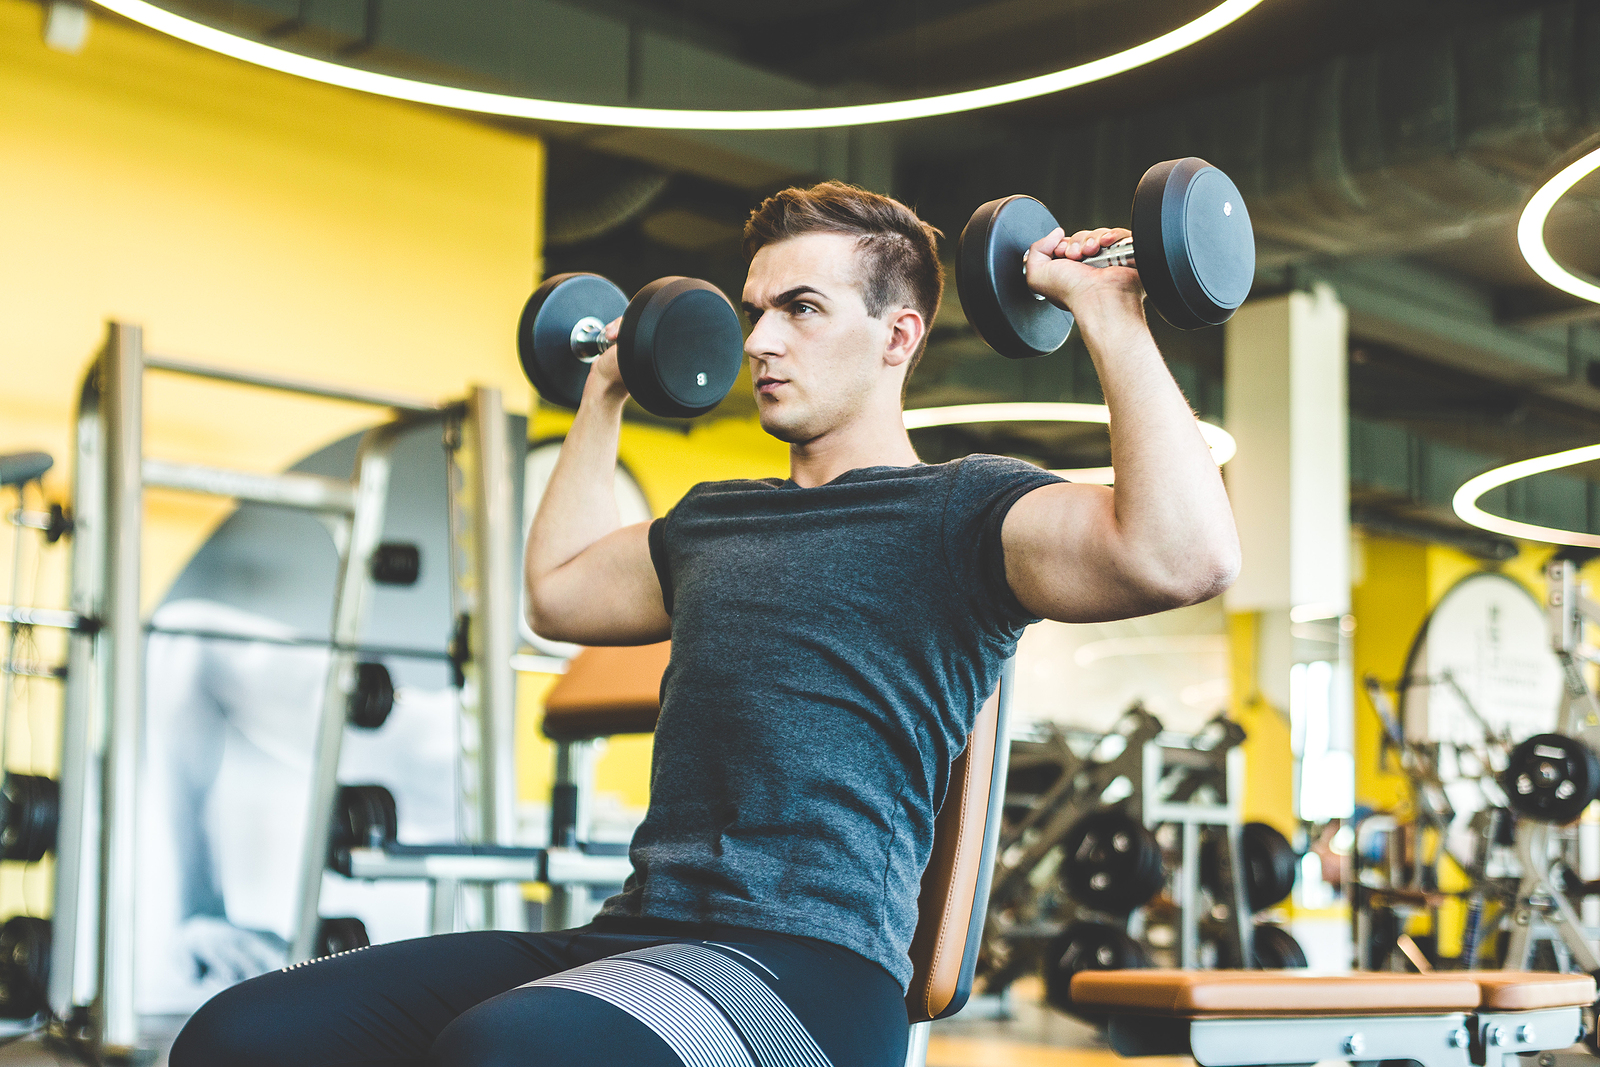 Essential things you need to know about body fitness programs.